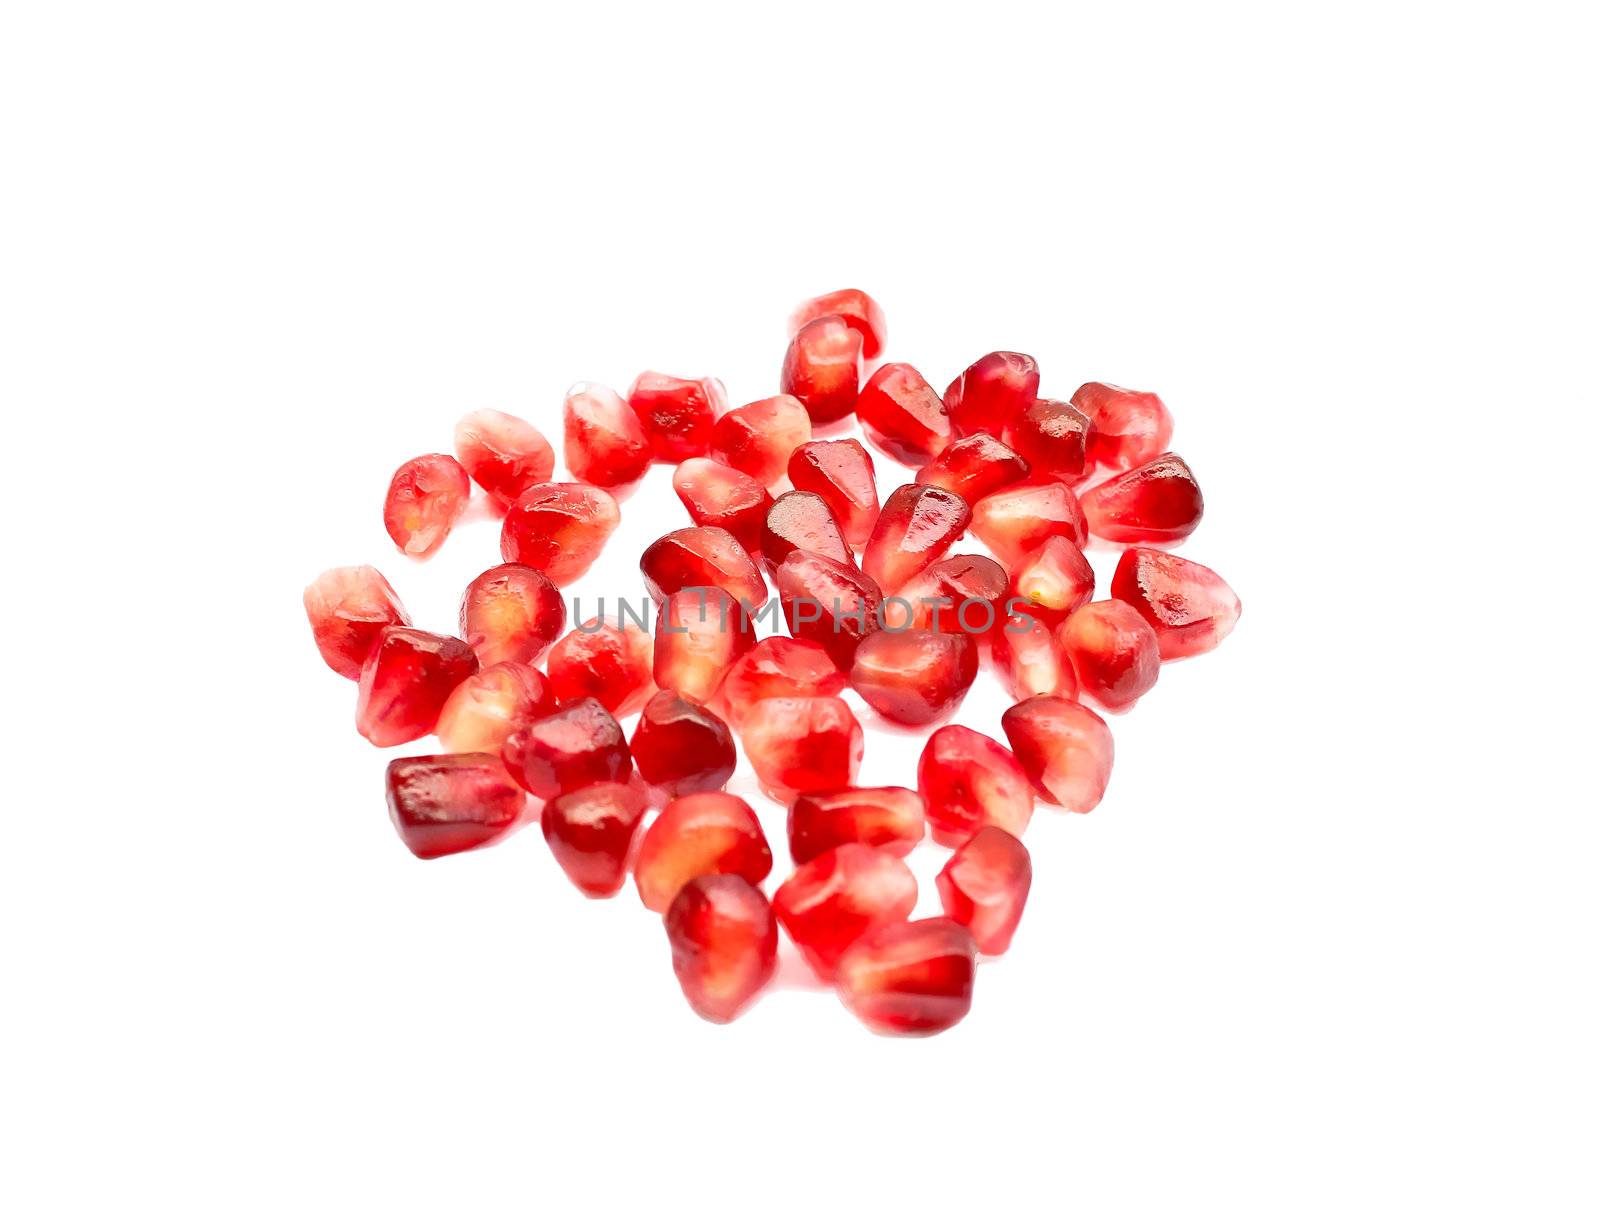 Pomegranate seeds on a white background